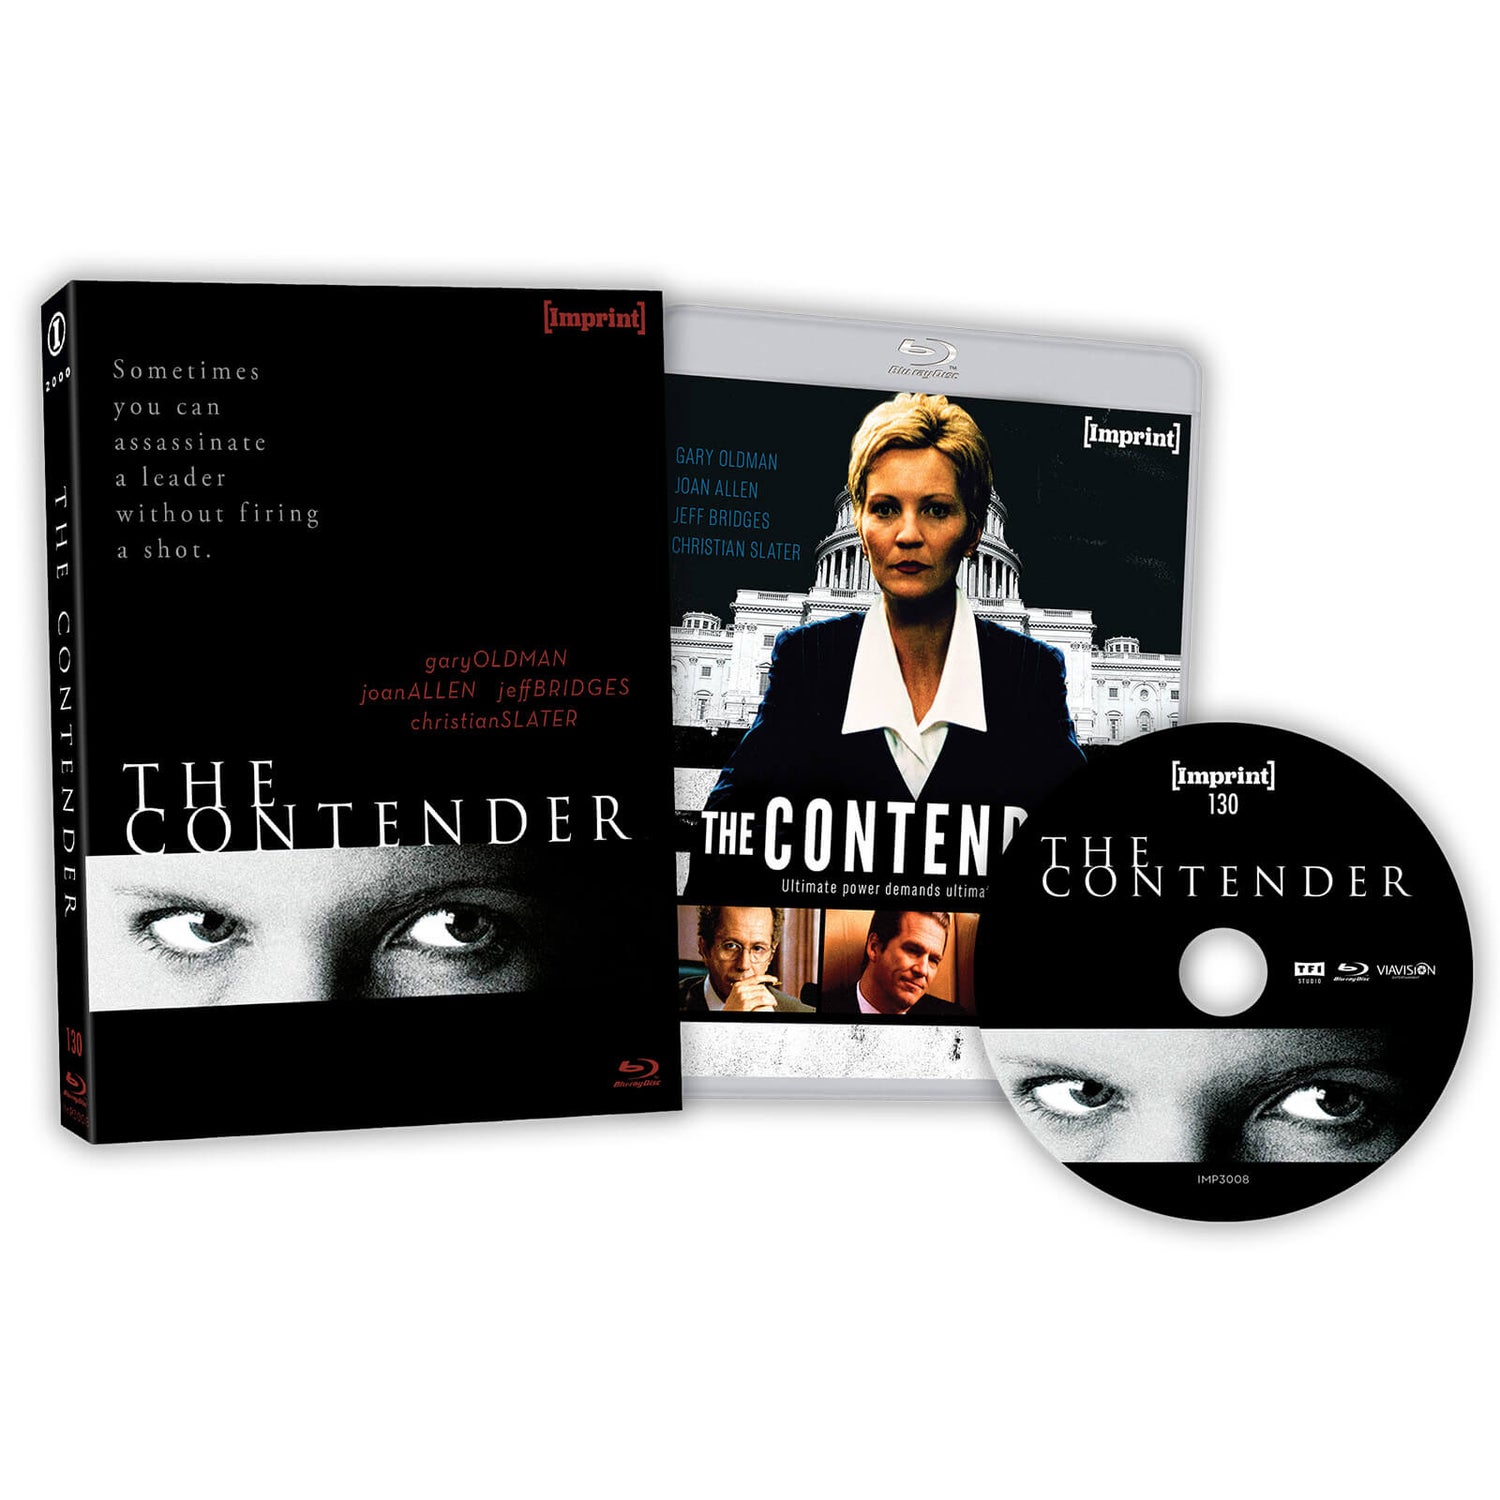 The Contender - Imprint Collection